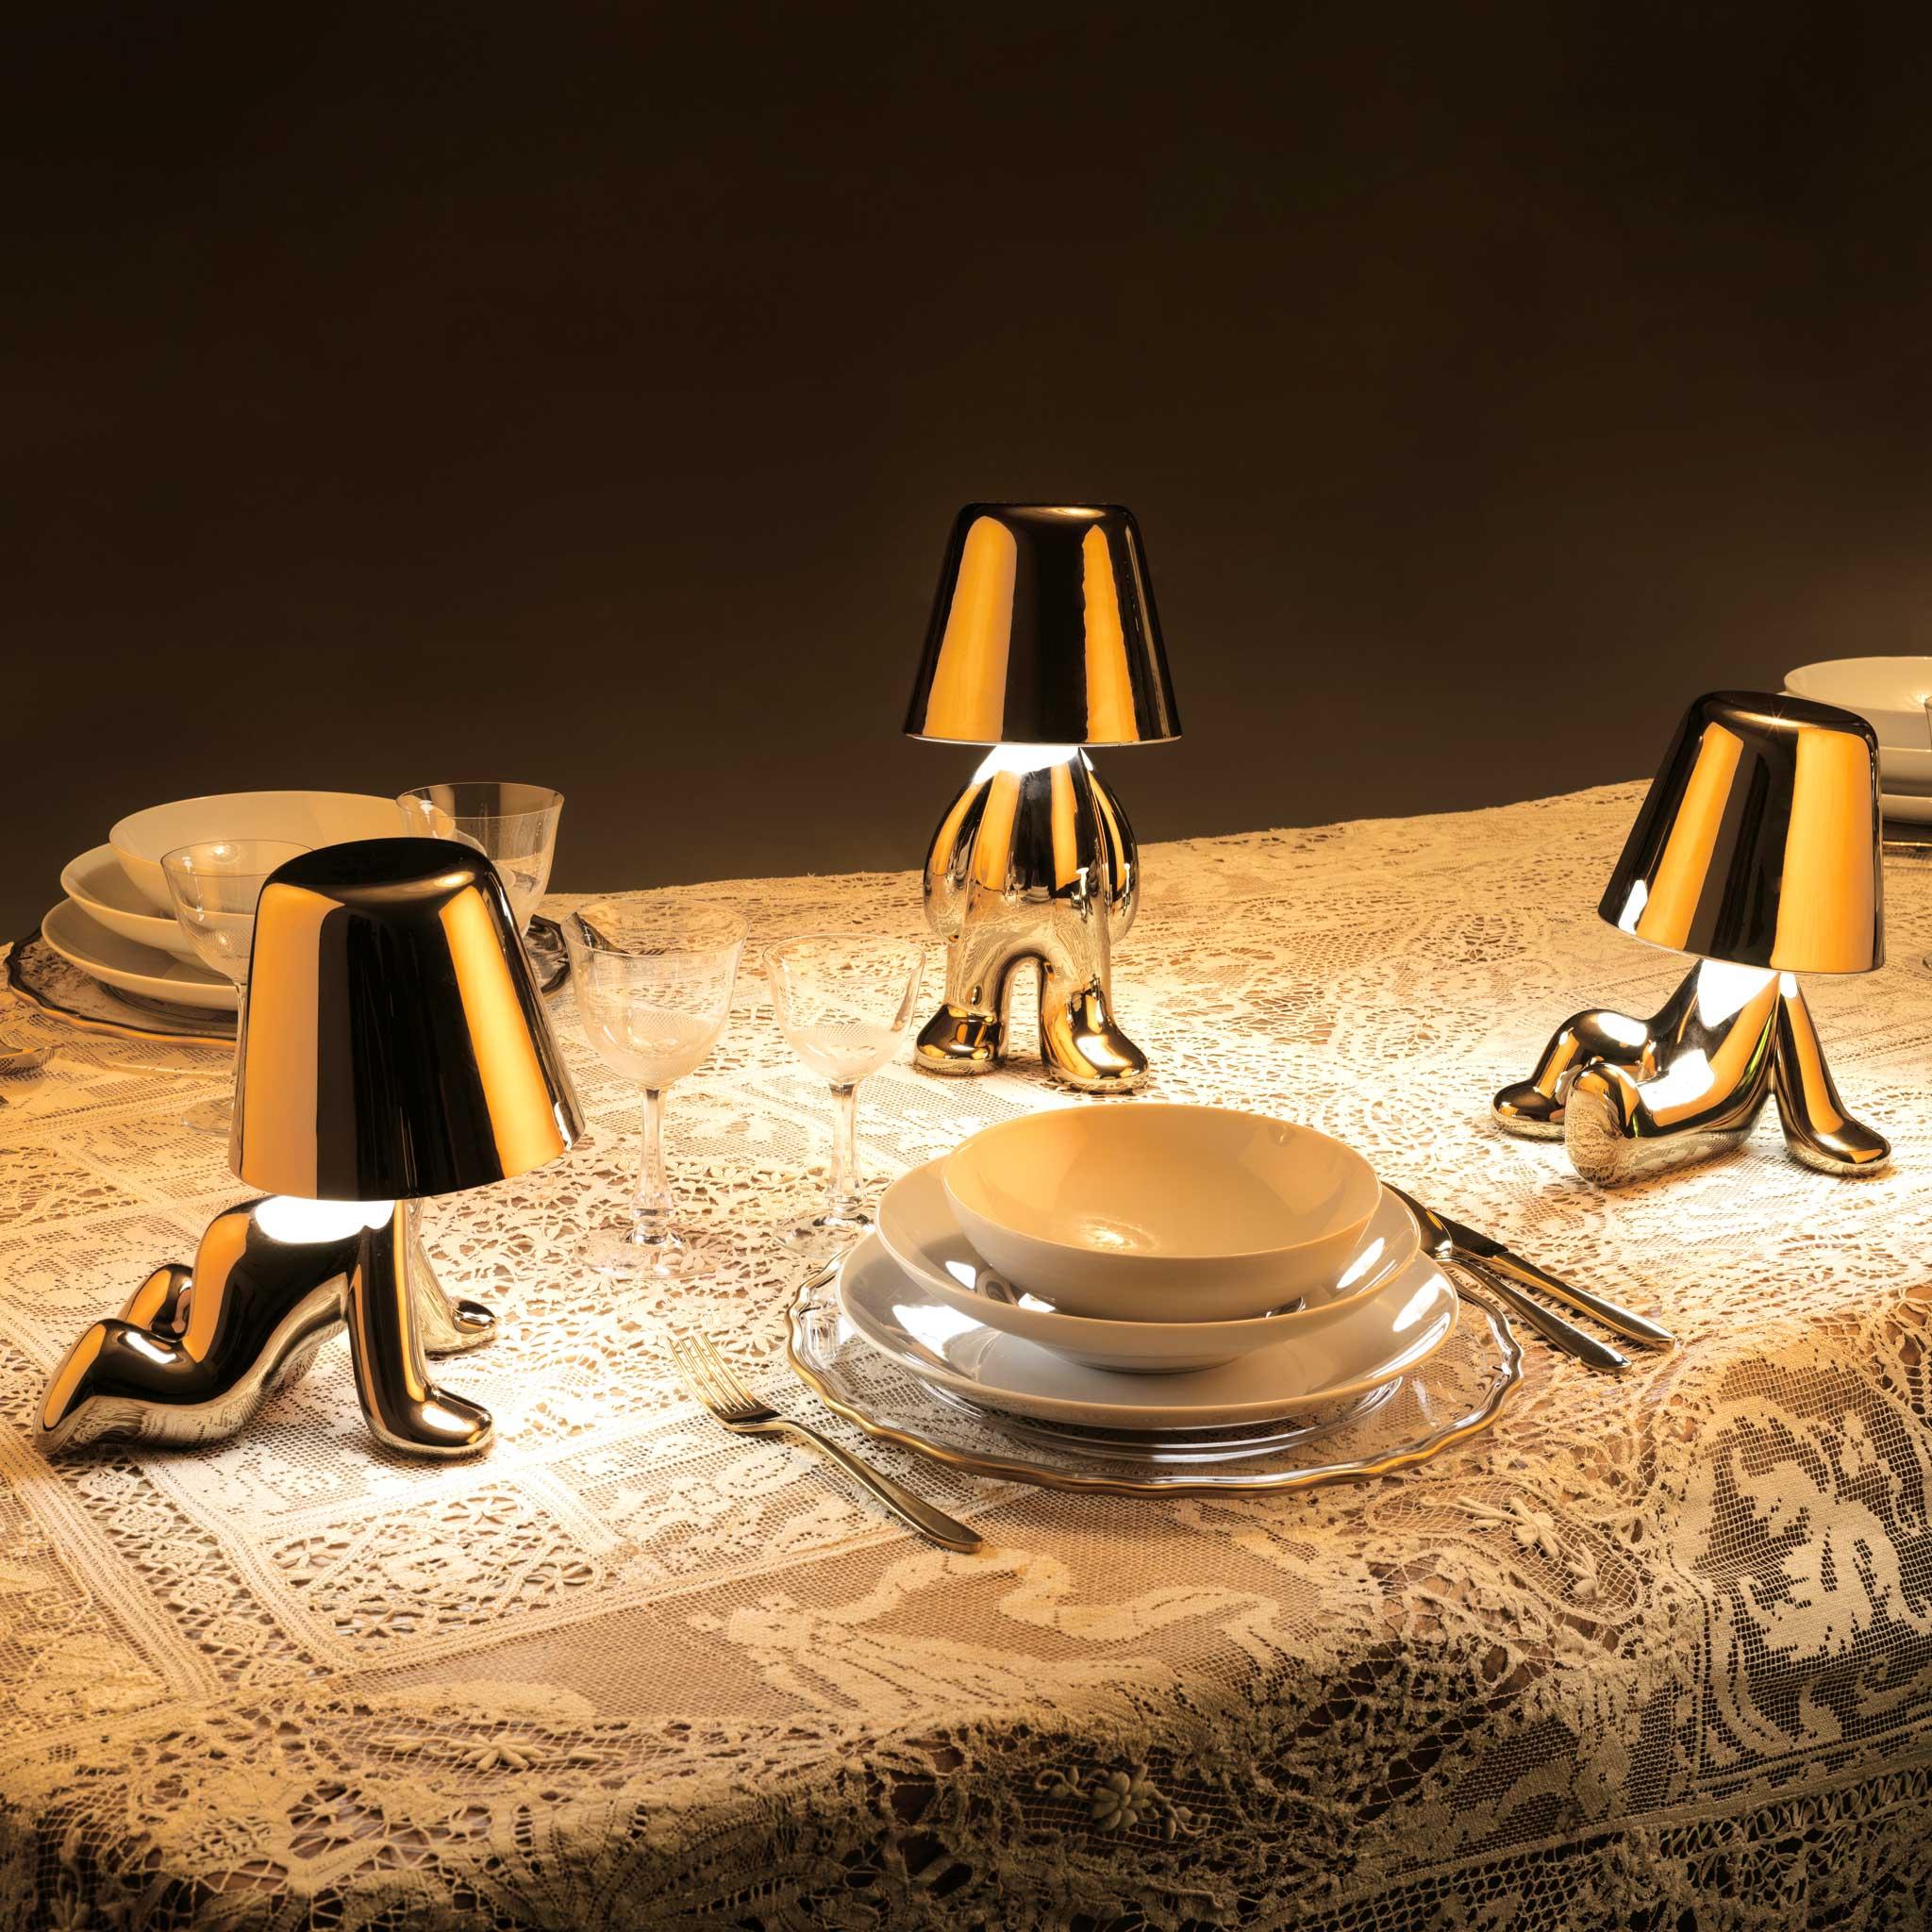 Modern Golden Brothers Sam LED Lamp, Designed by Stefano Giovannoni, Made in Italy